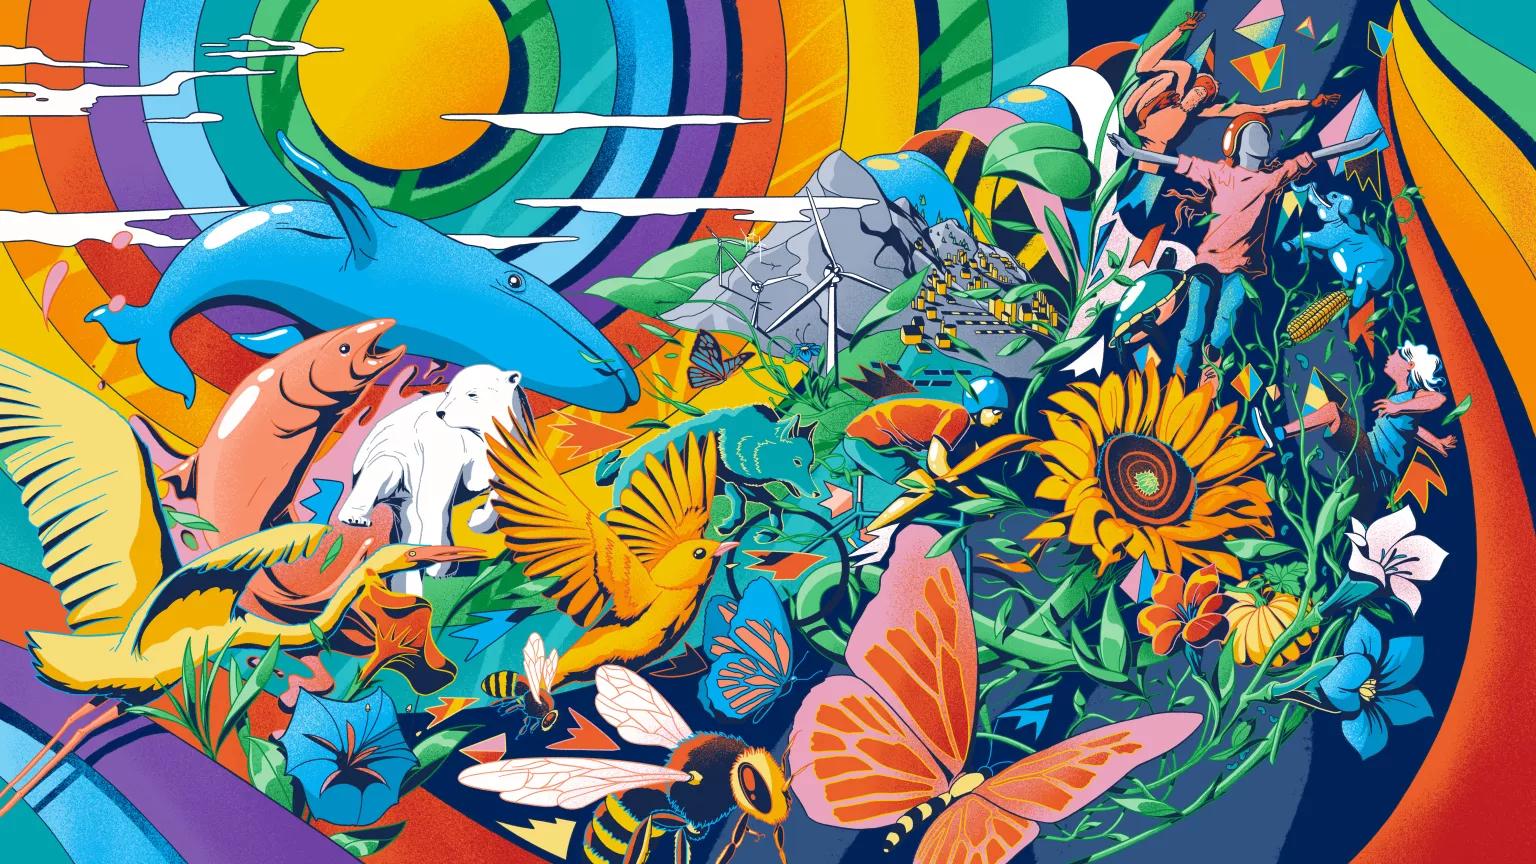 A colorful illustration showing plants, animals, and people